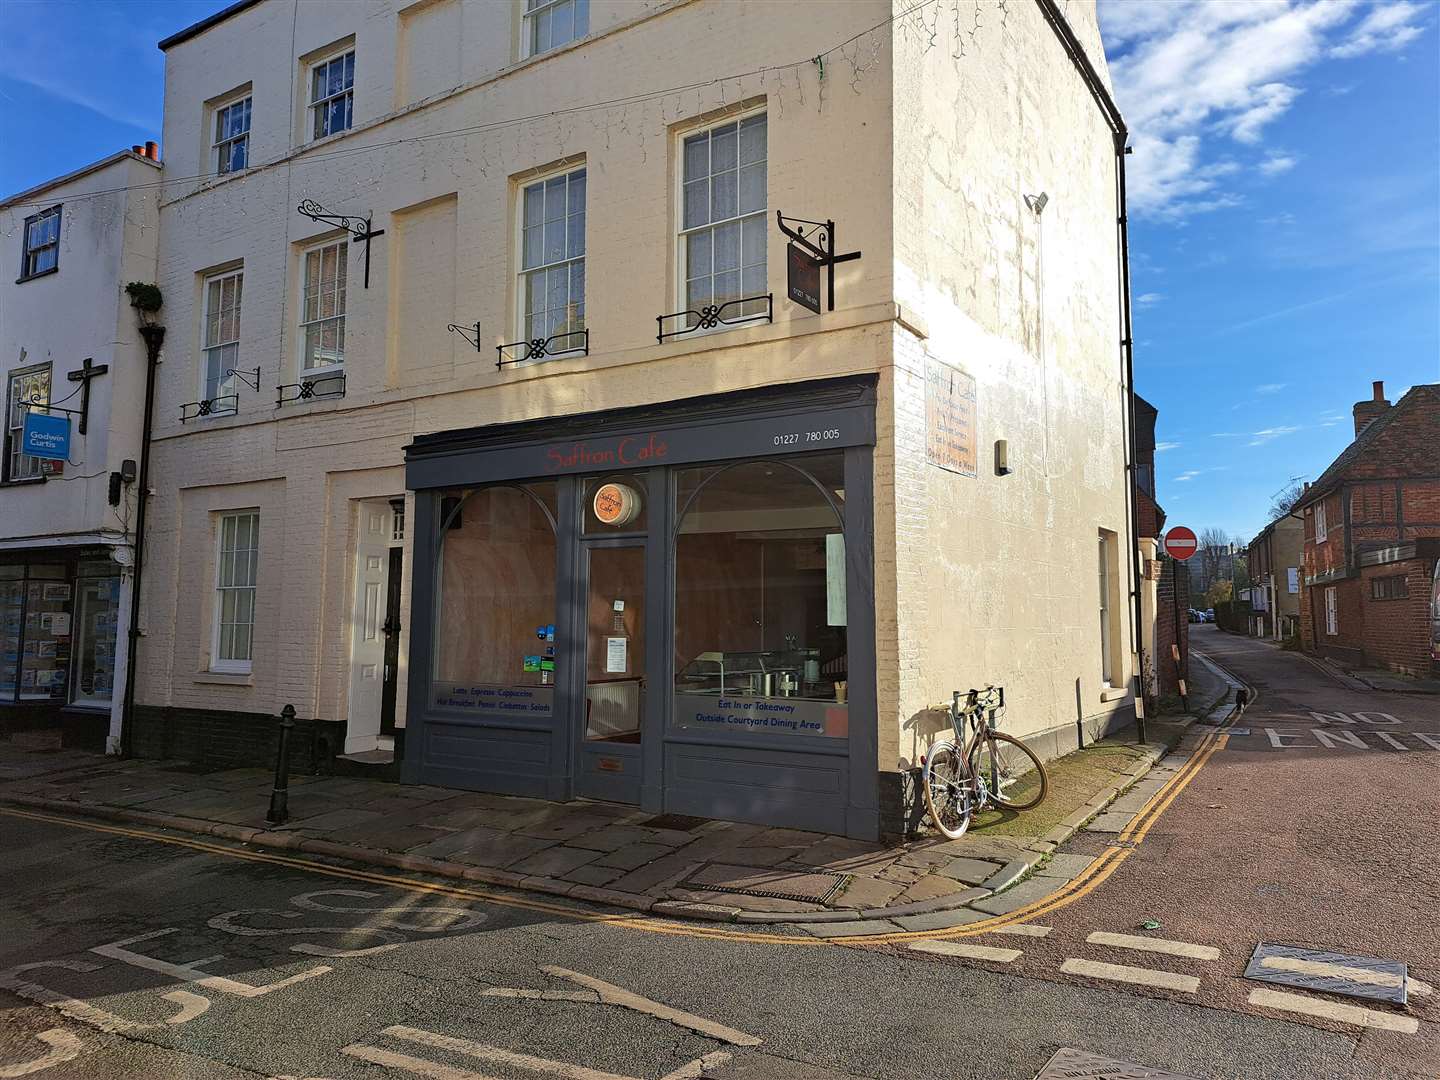 Saffron Café, in Castle Street, Canterbury has closed its doors after more than 20 years